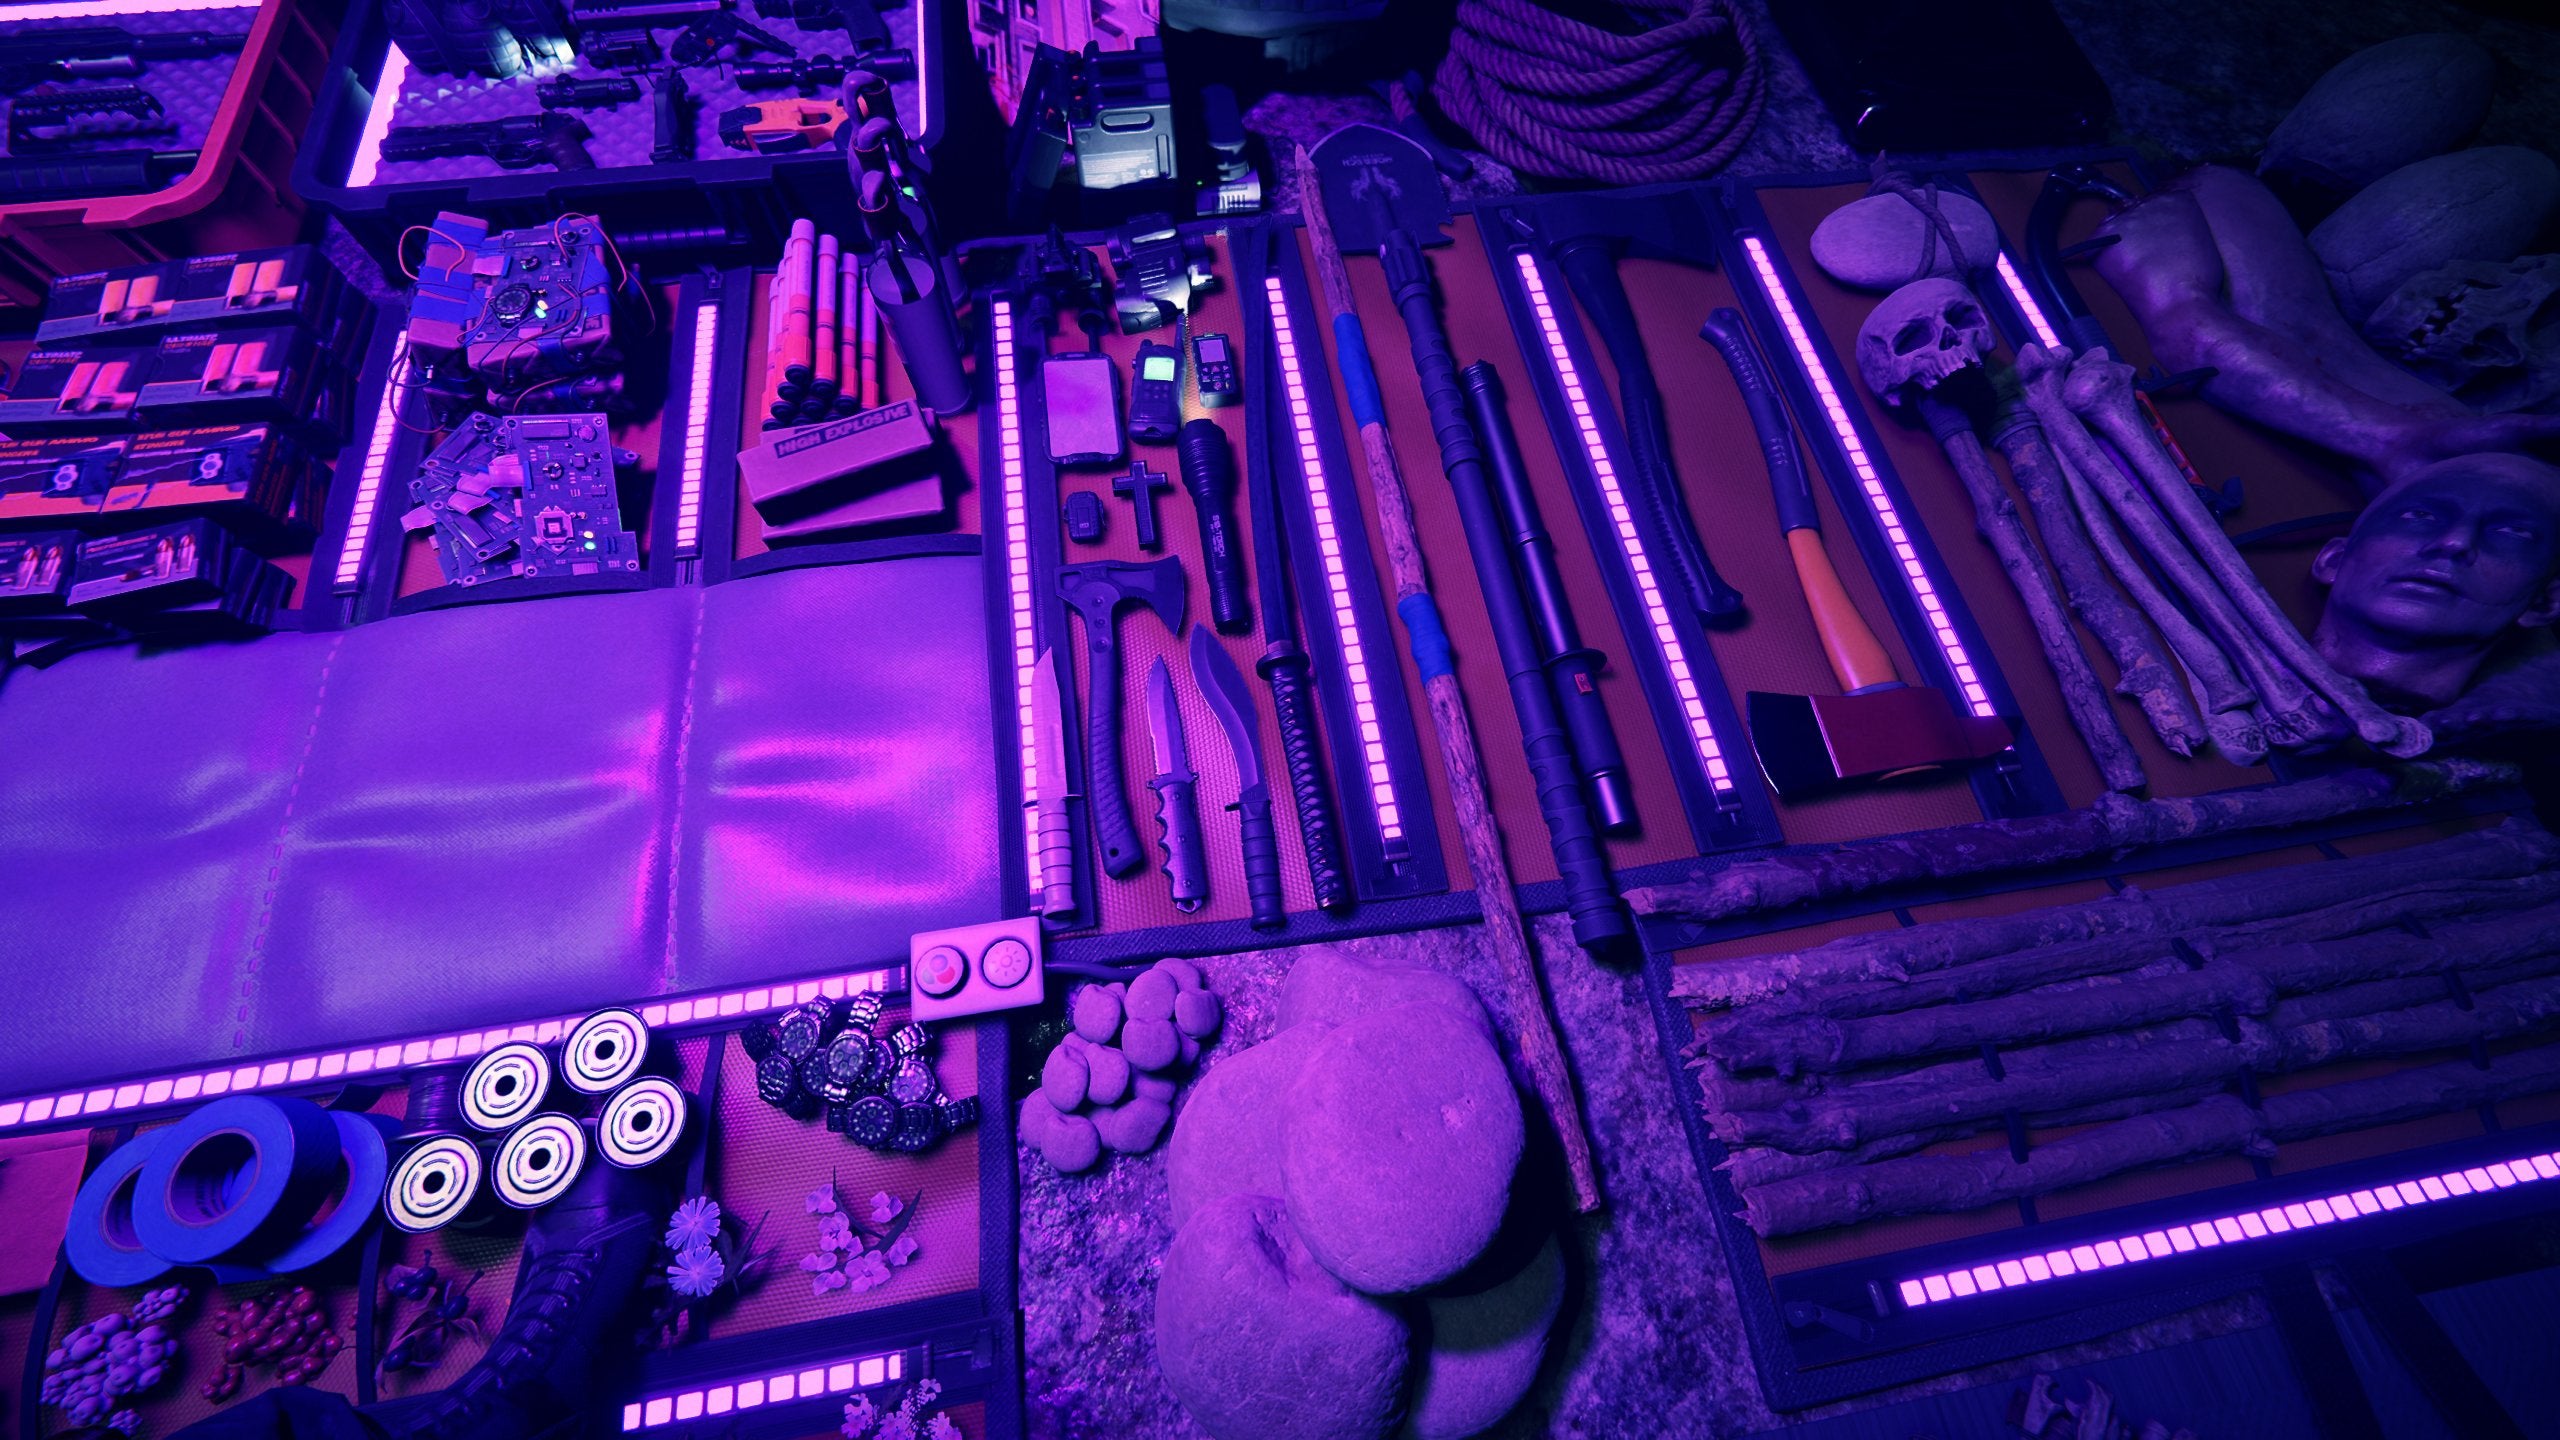 An impressive inventory of weapons and items under UV light in a Sons Of The Forest screenshot.